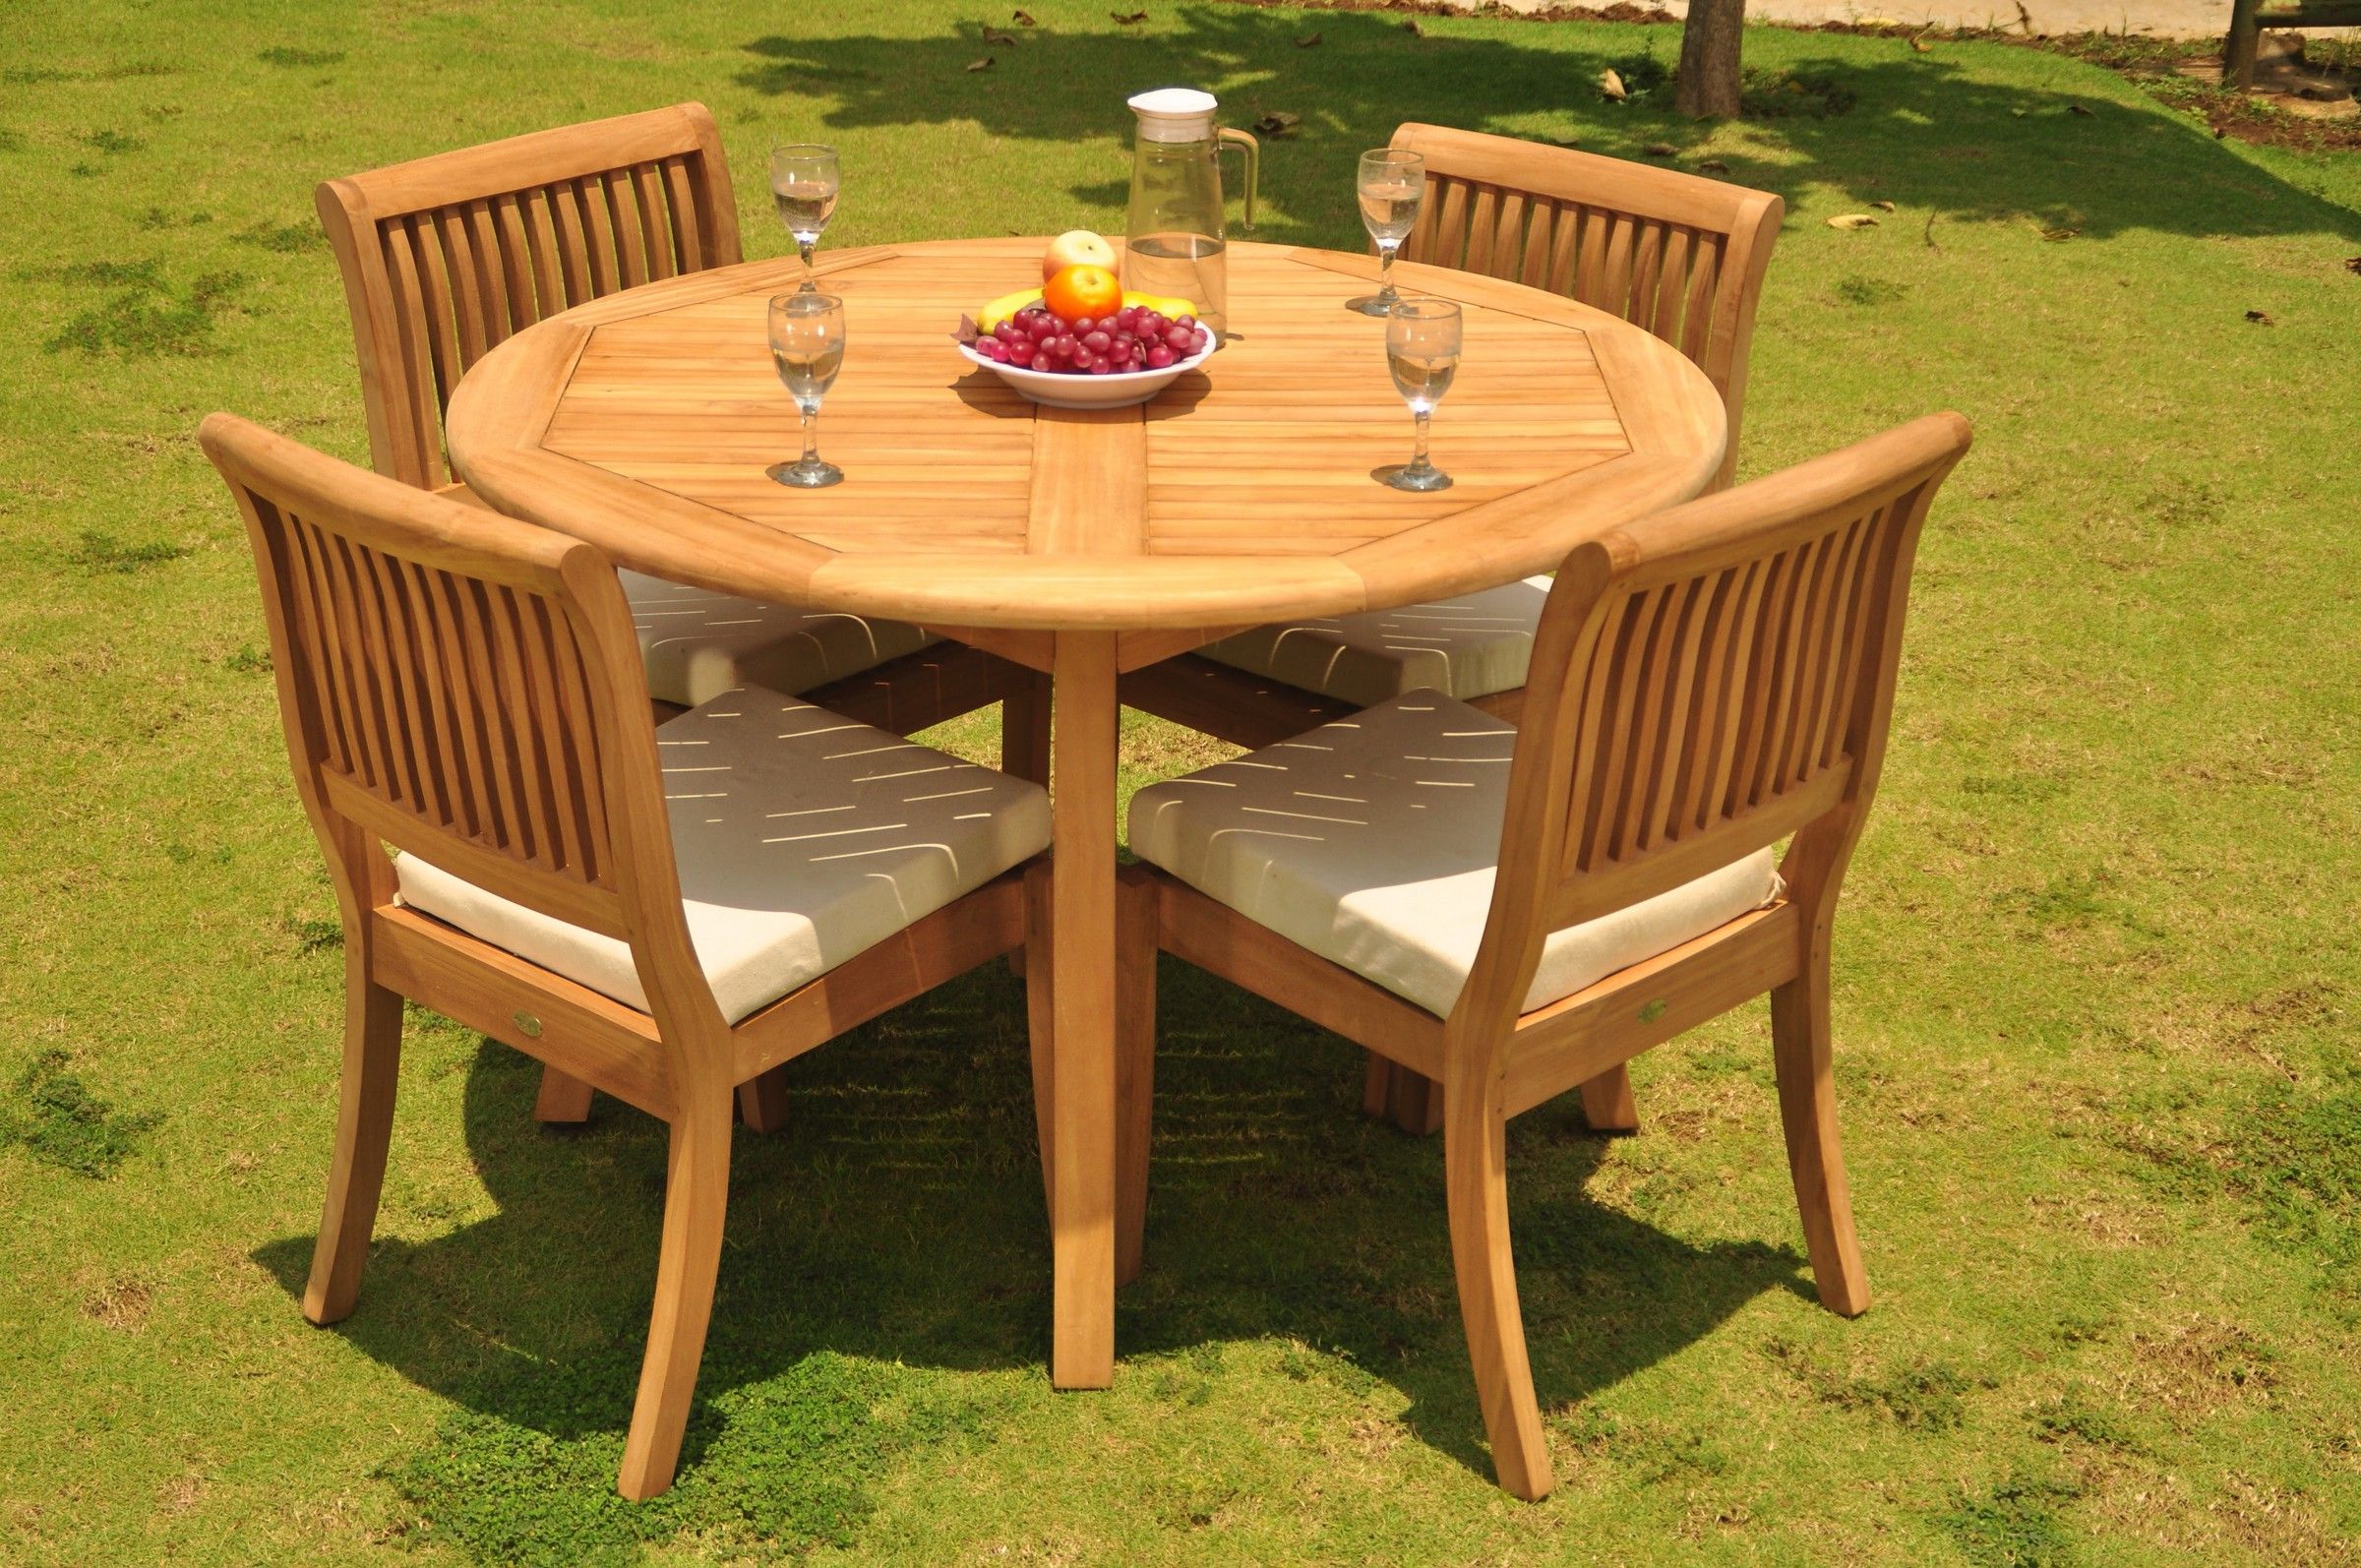 Preferred Teak Wood Outdoor Table And Chairs Sets Pertaining To Teak Dining Set: 4 Seater 5 Pc: 48" Round Table And 4 Arbor Armless (View 2 of 15)